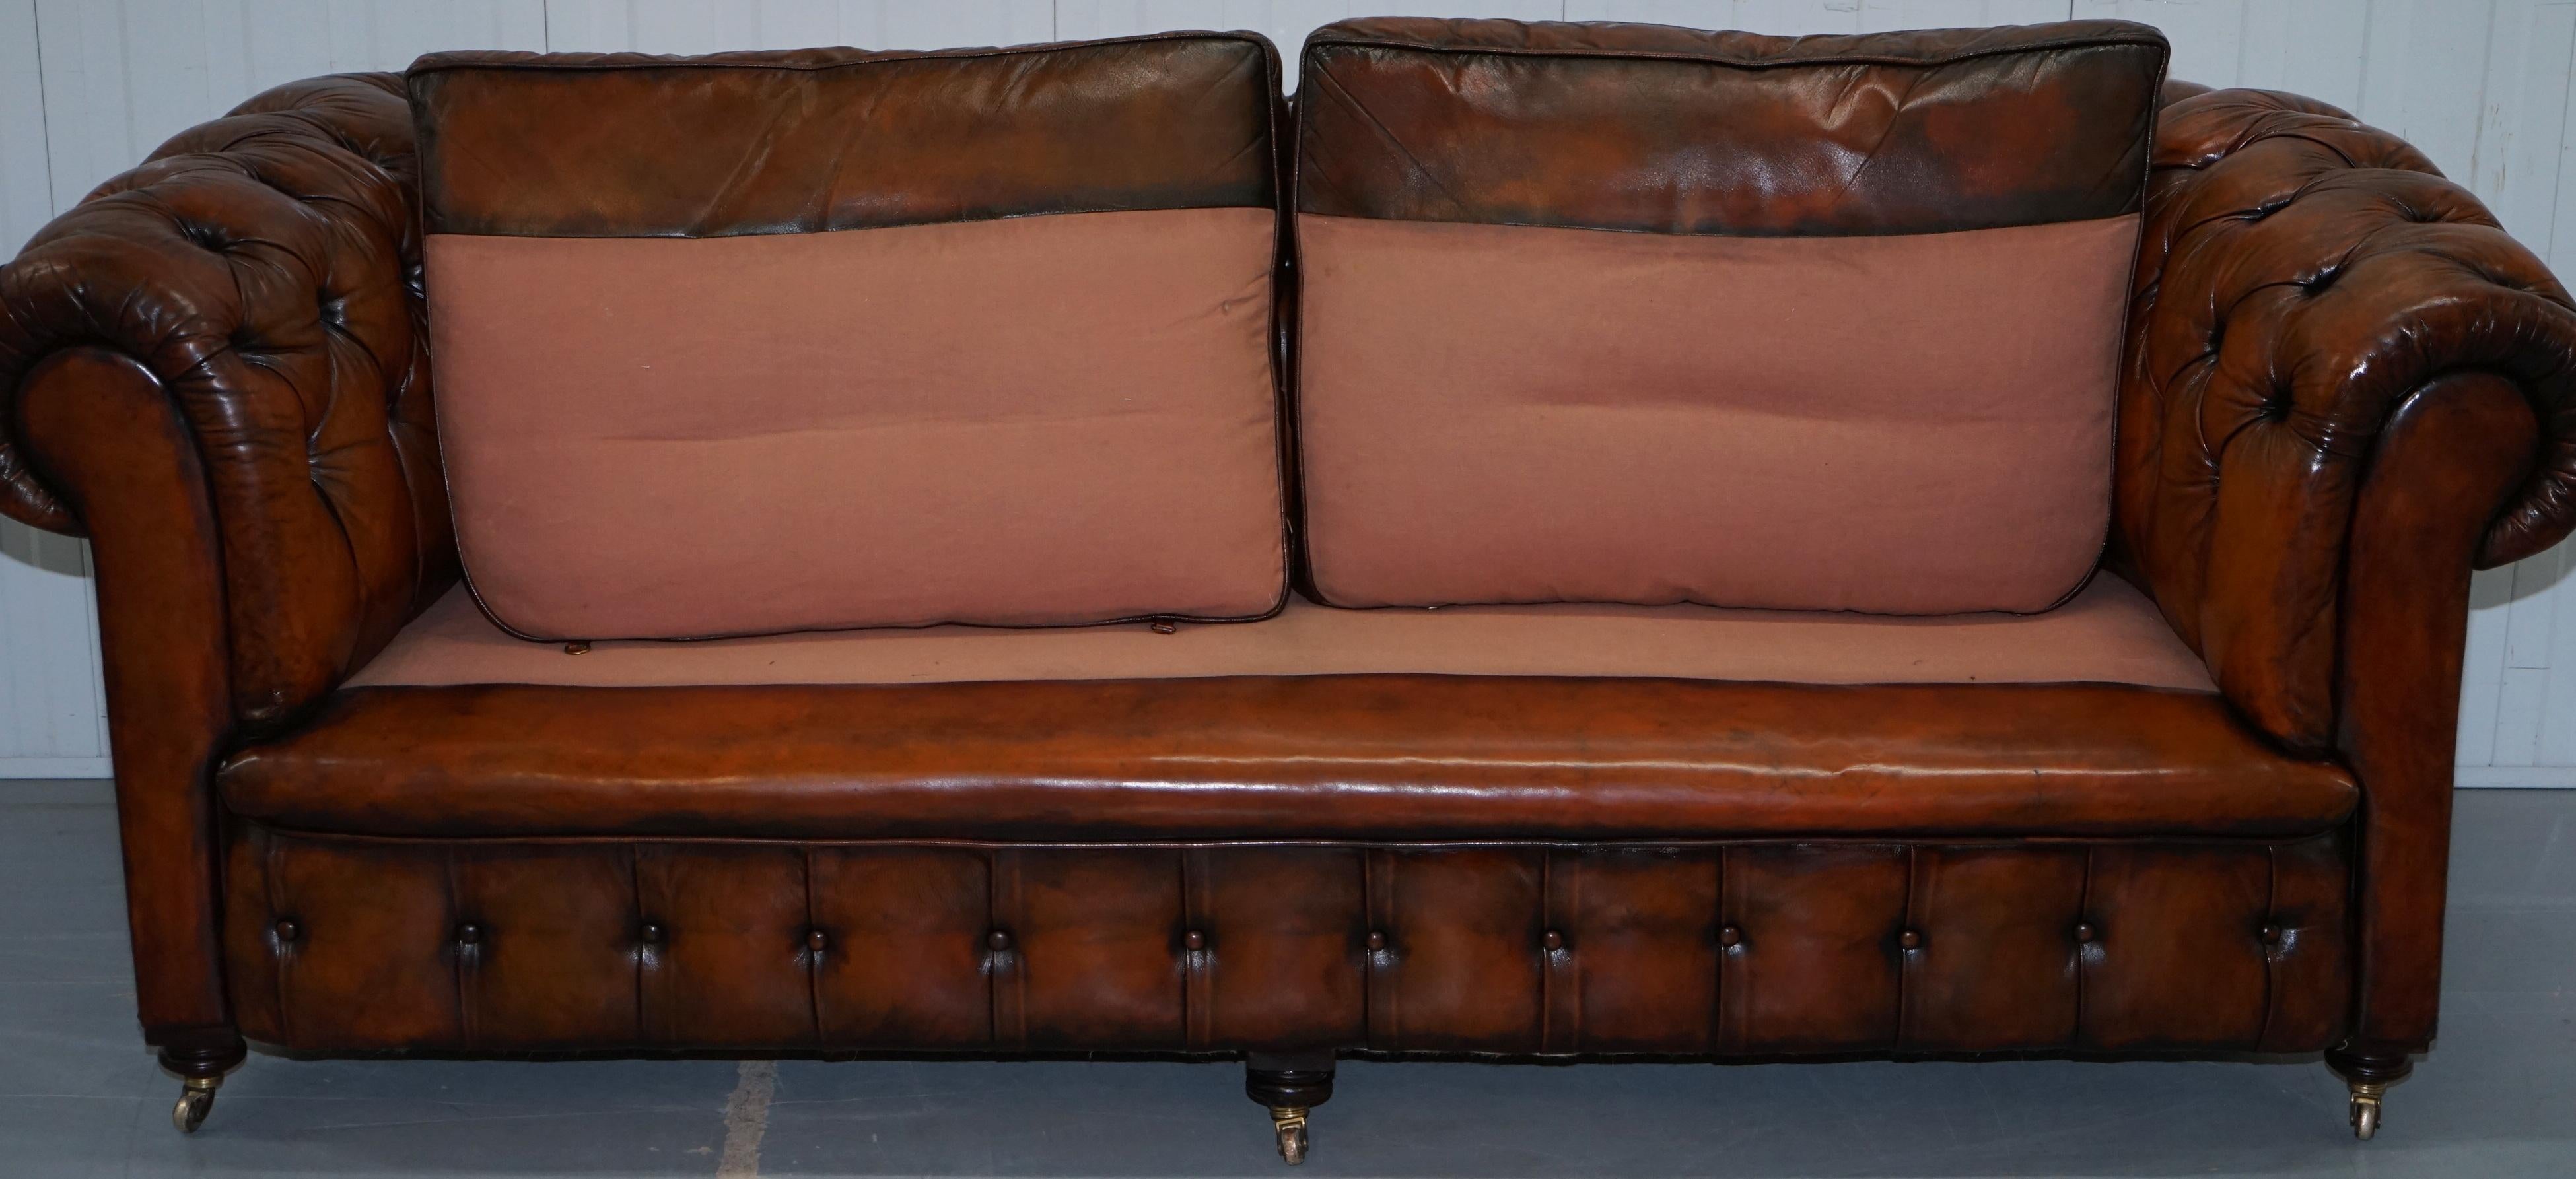 Rare Victorian Chesterfield Hand Dyed Brown Leather Sofa Horse Hair Coil Sprung 6